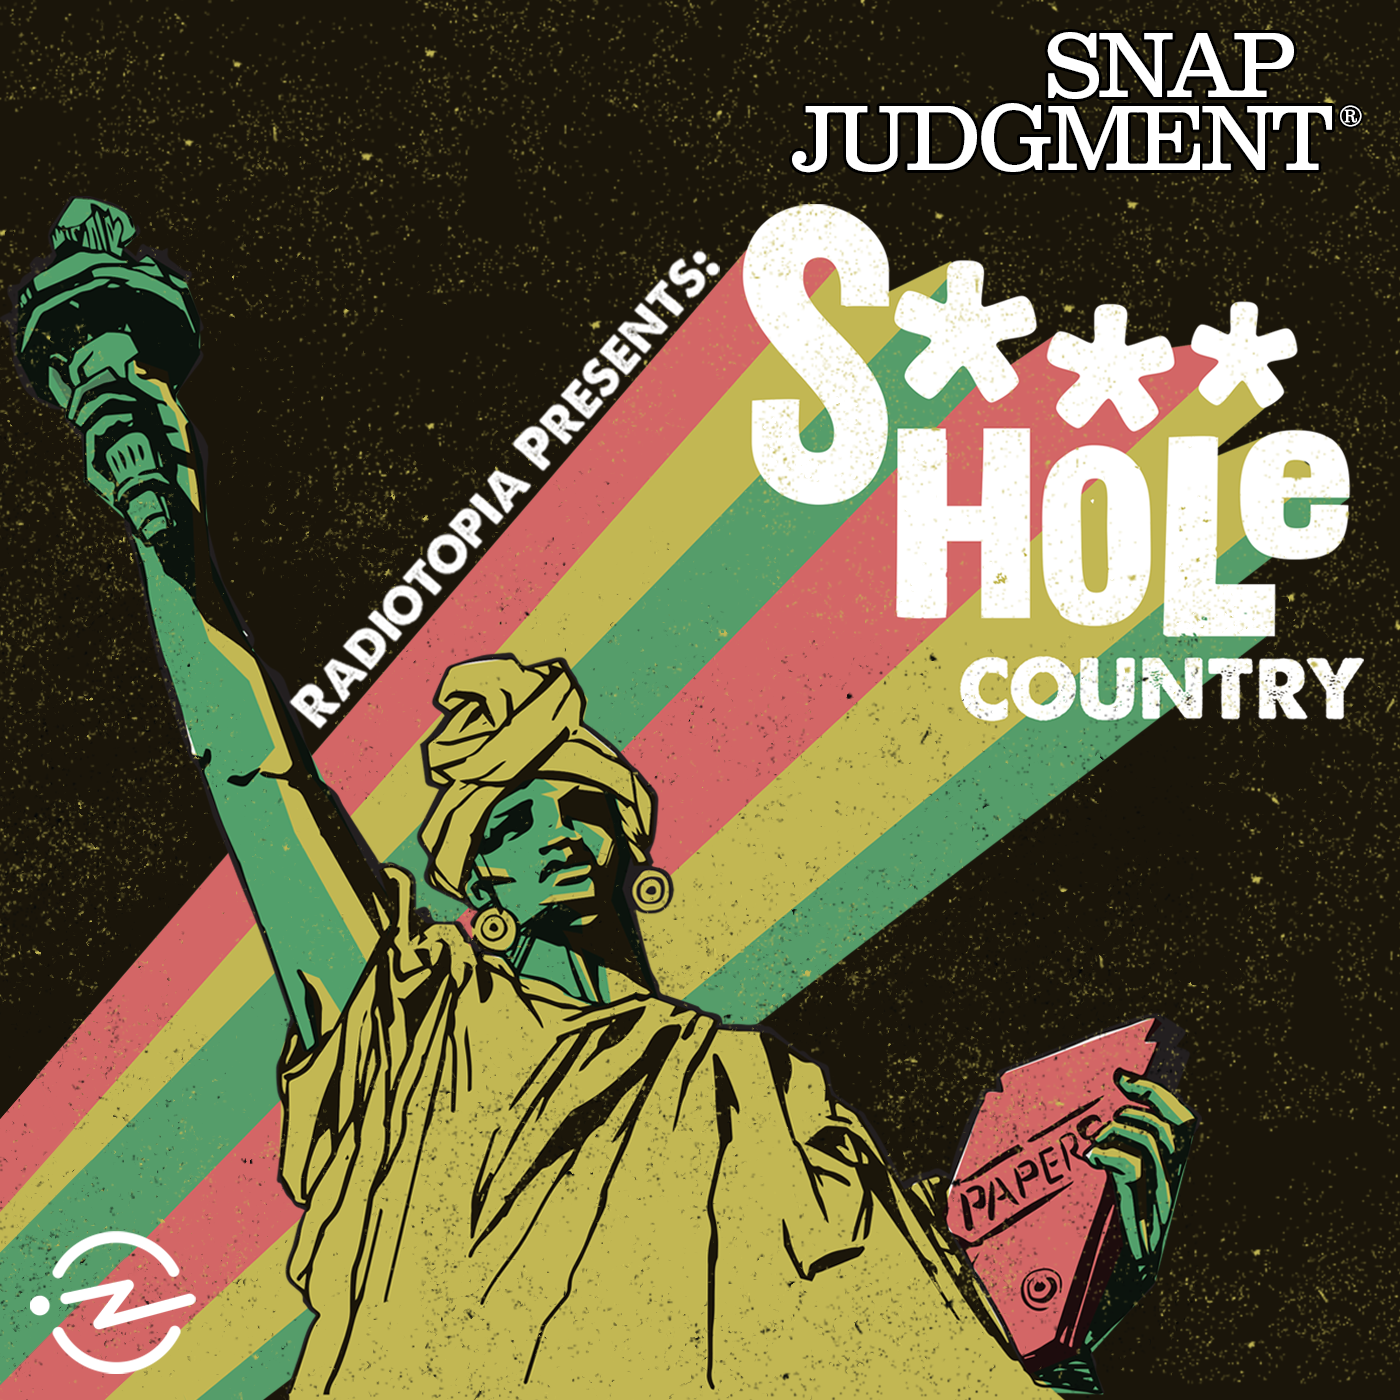 Thumbnail for "S***hole Country from Radiotopia Presents".